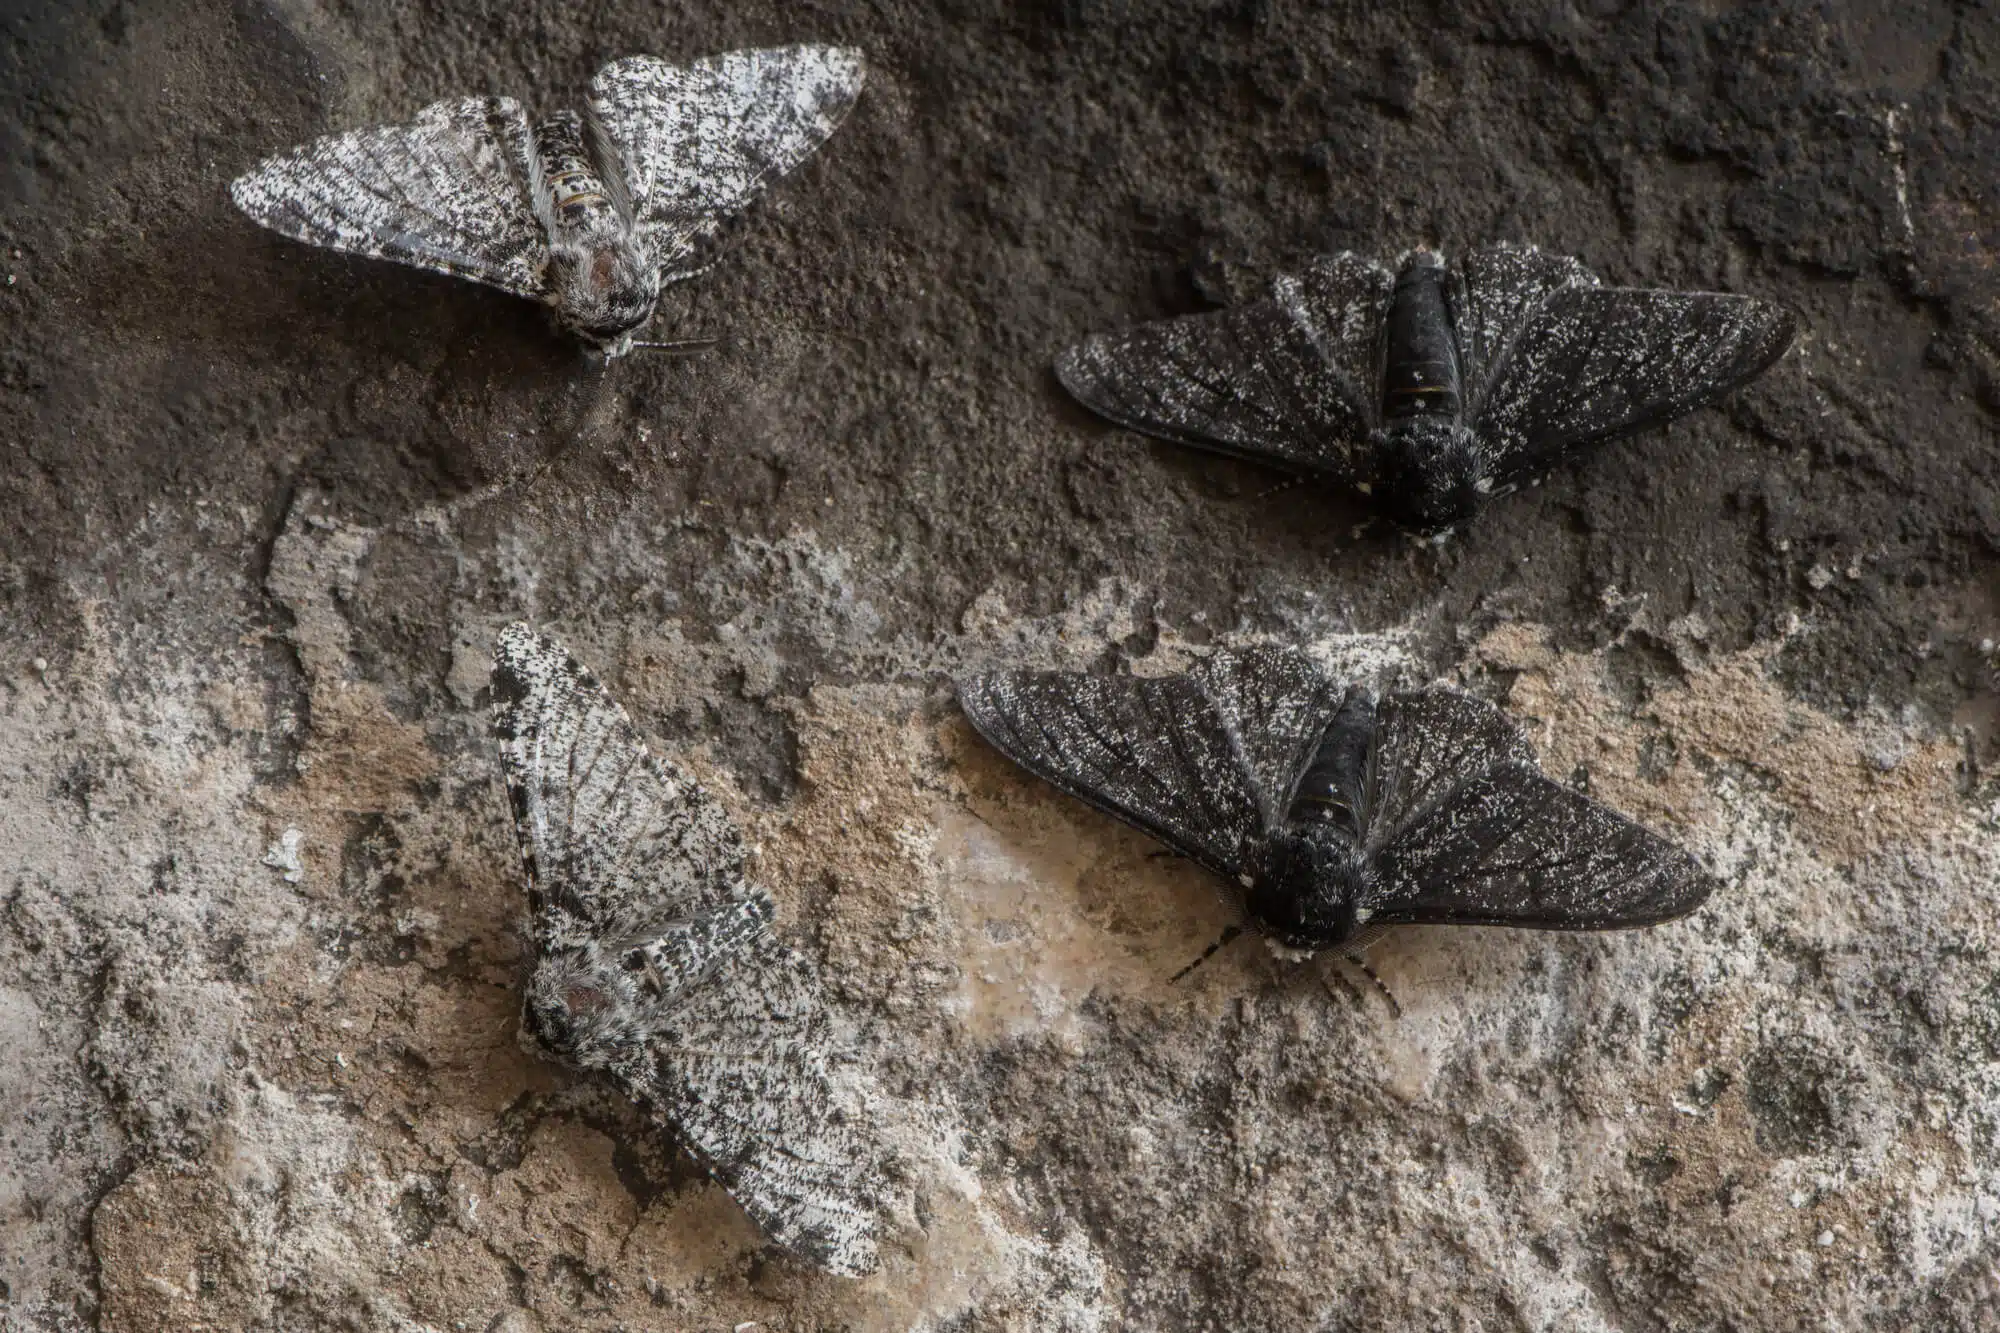 The rapid evolution of the moths that turned from white to black because of the air pollution that darkened the trees. Photo: depositphotos.com